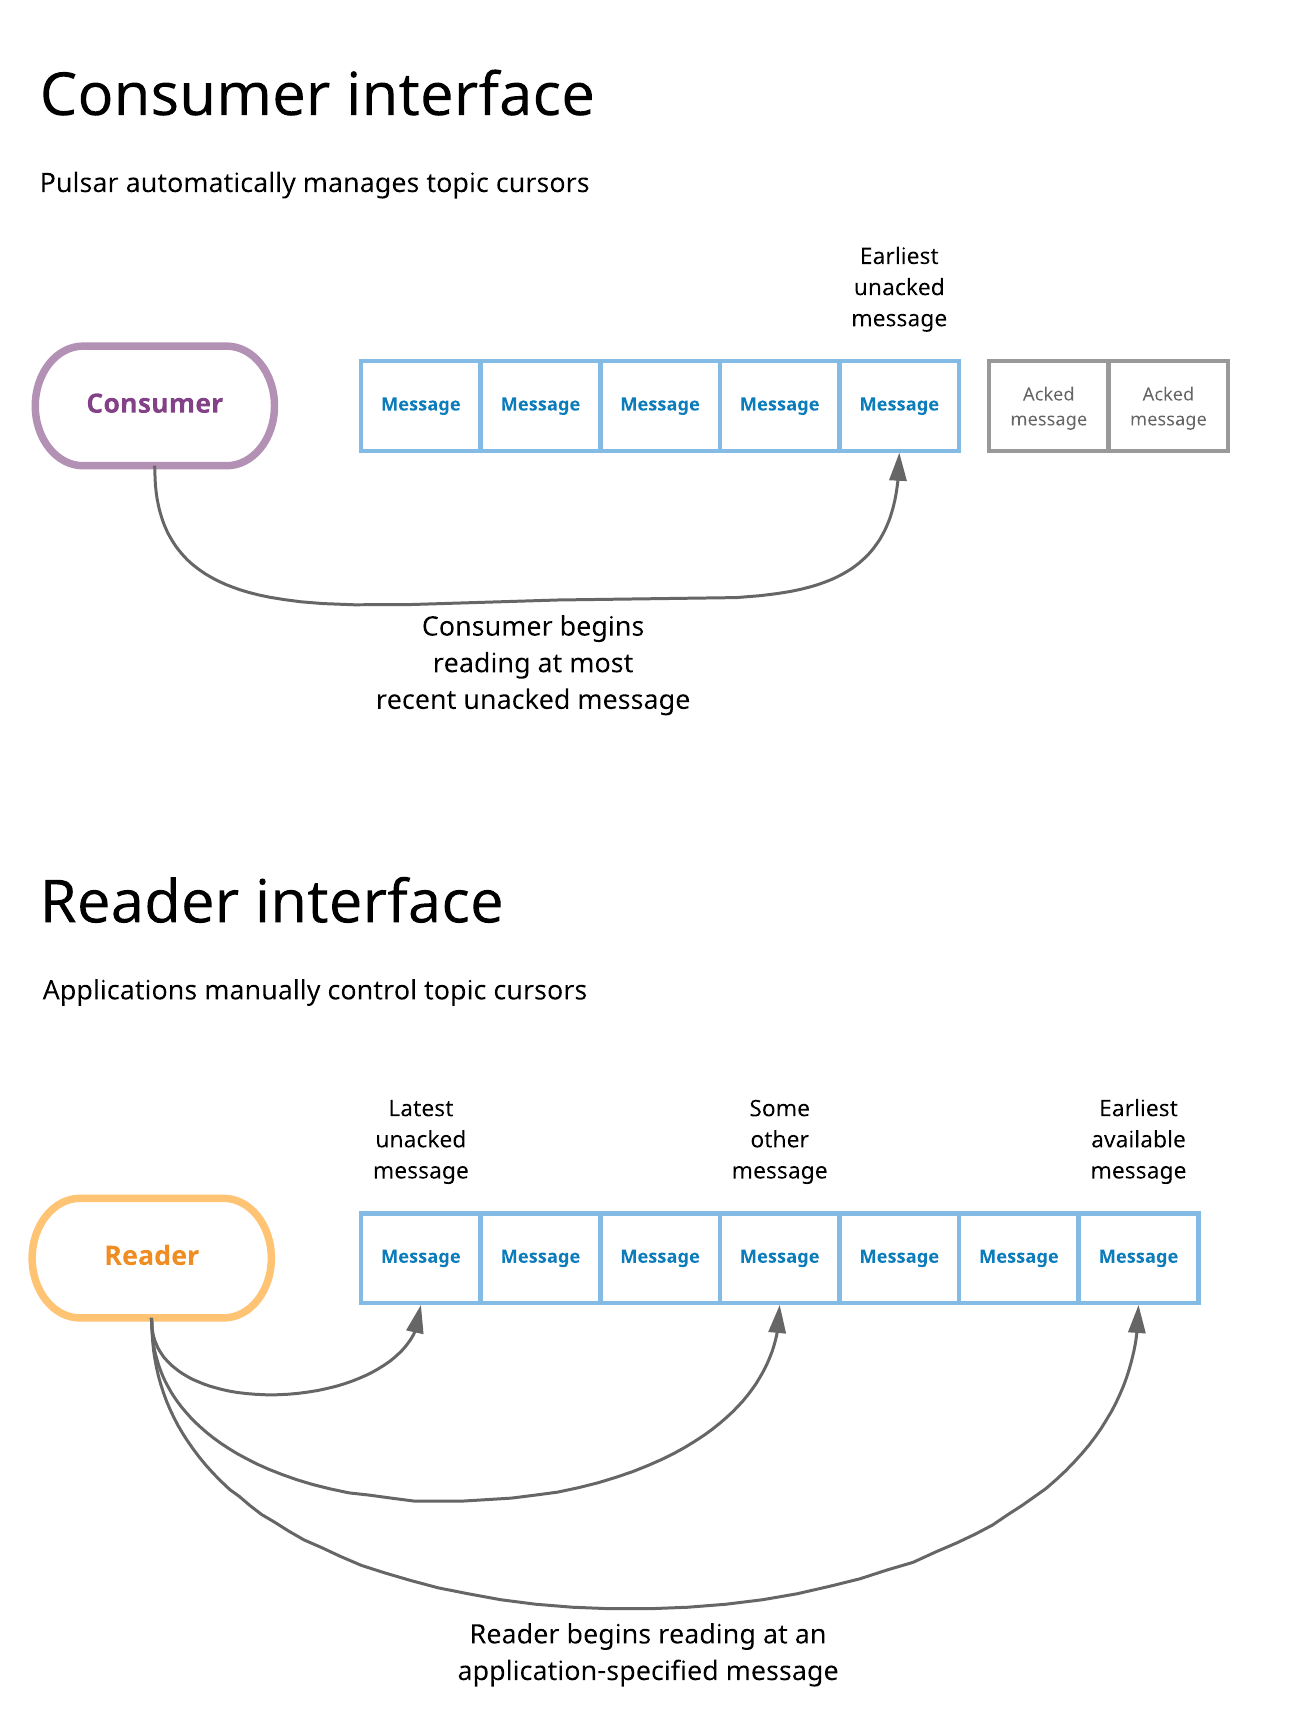 Consumer and reader interfaces in Pulsar